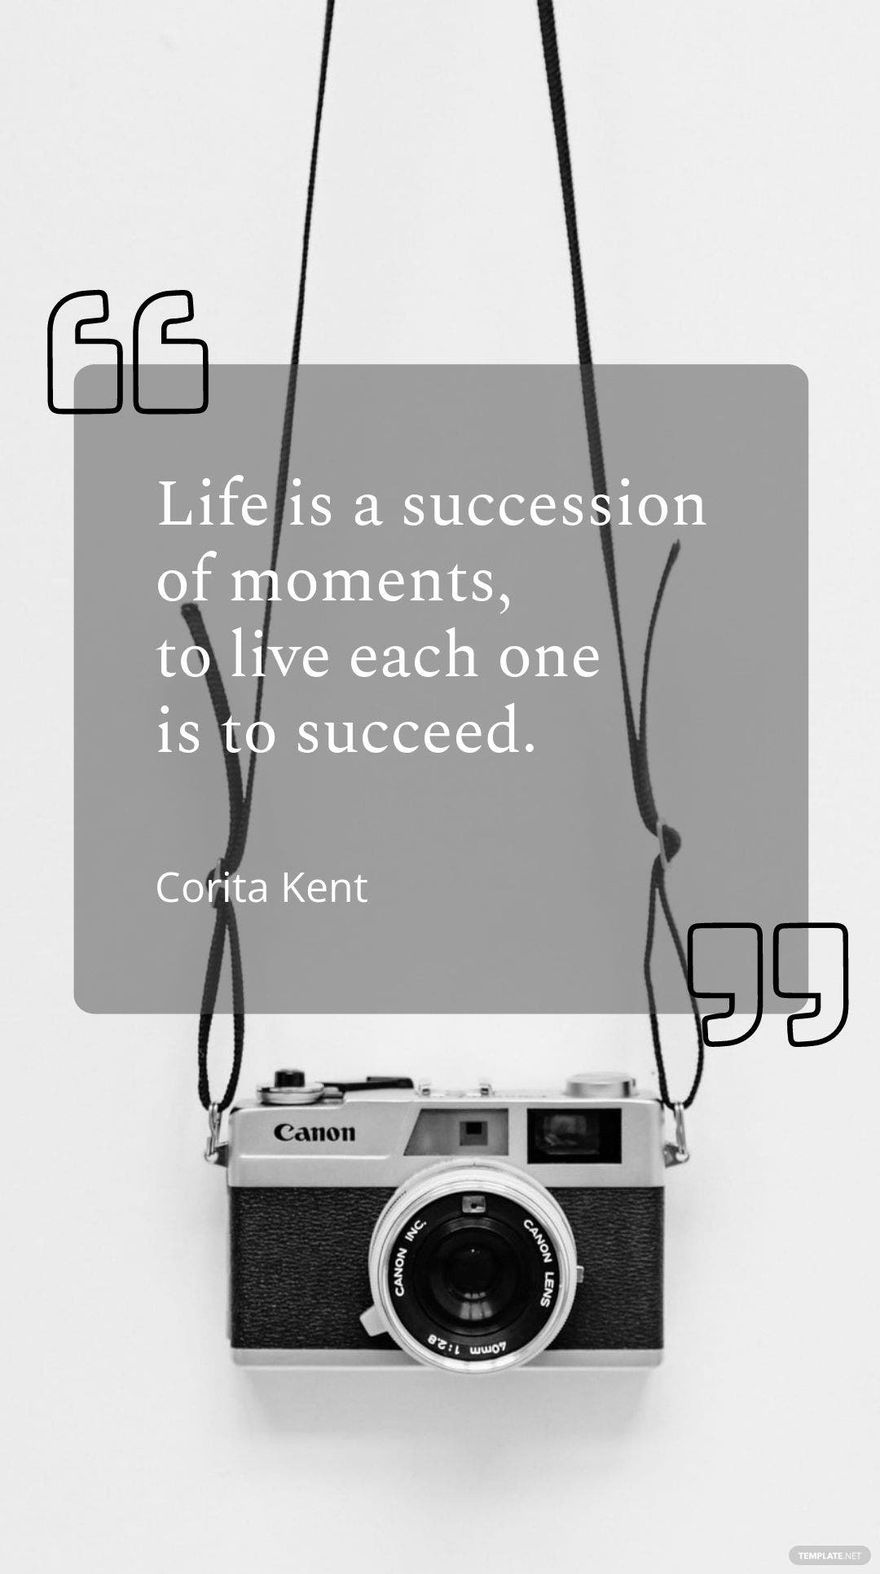 Corita Kent - "Life is a succession of moments, to live each one is to succeed."